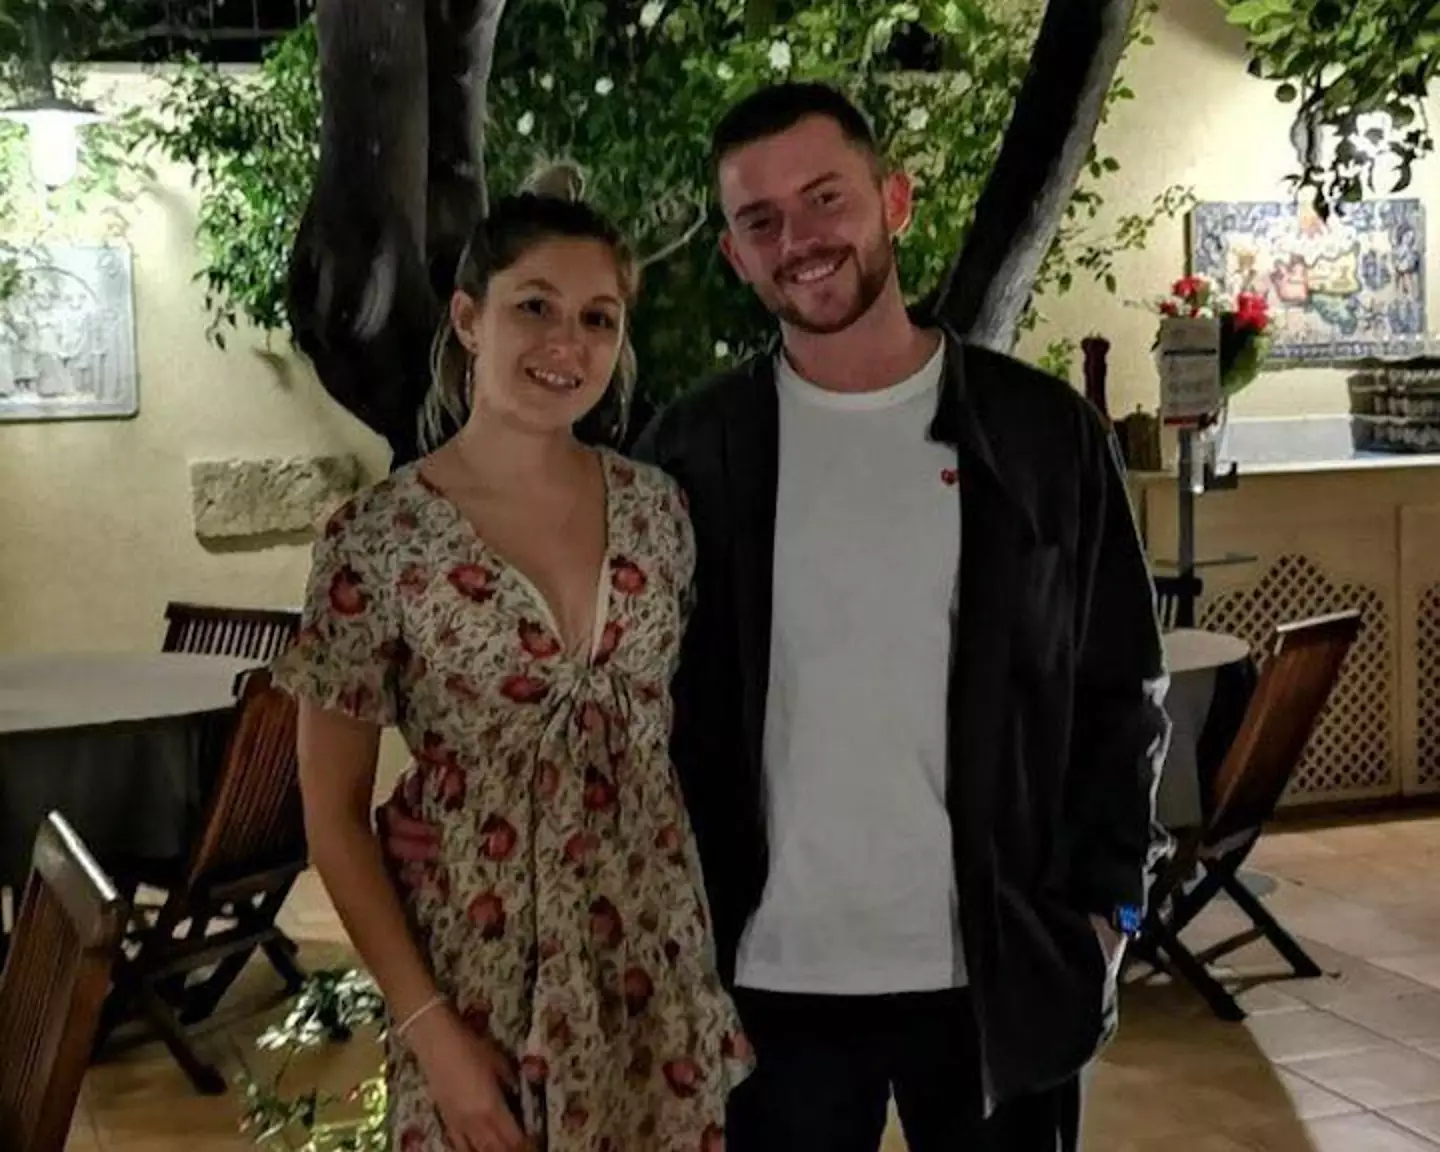 Aidan and Alex were in Italy just weeks before her death.